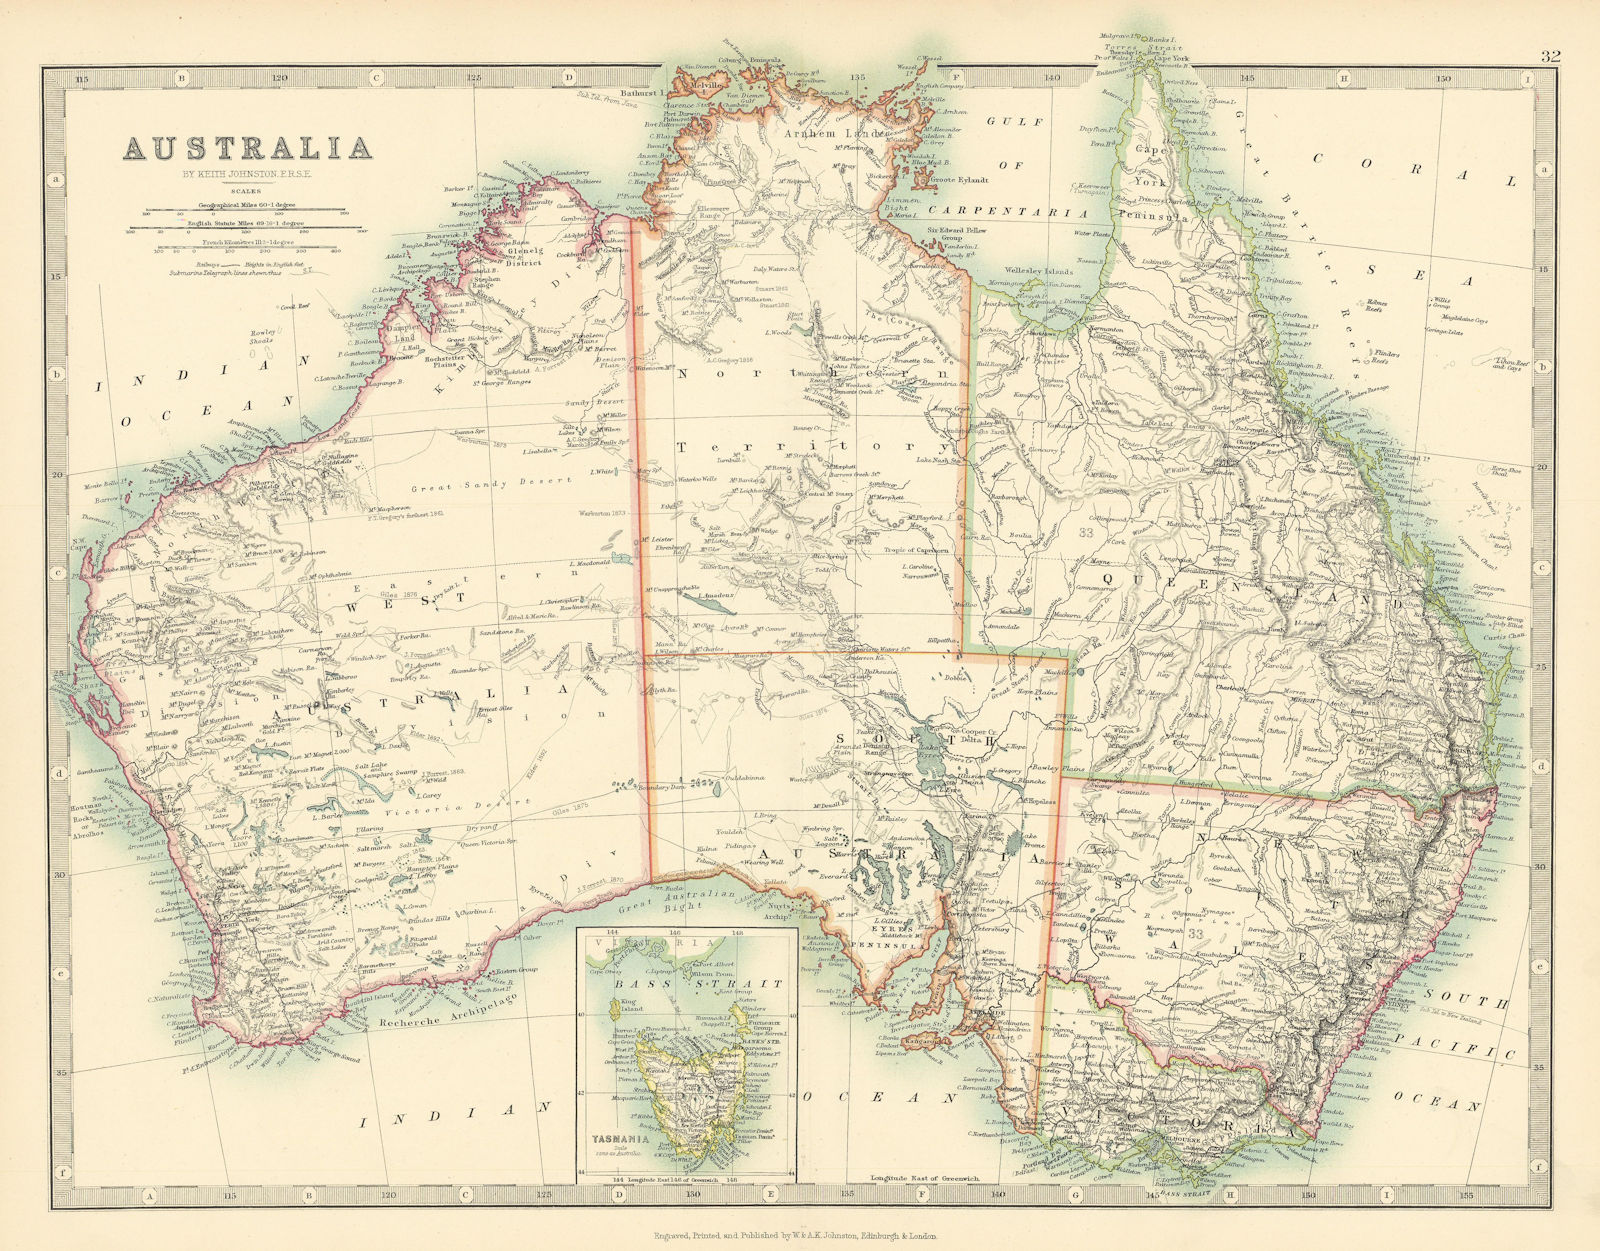 Associate Product AUSTRALIA Showing explorers' routes with dates Railways JOHNSTON 1897 old map